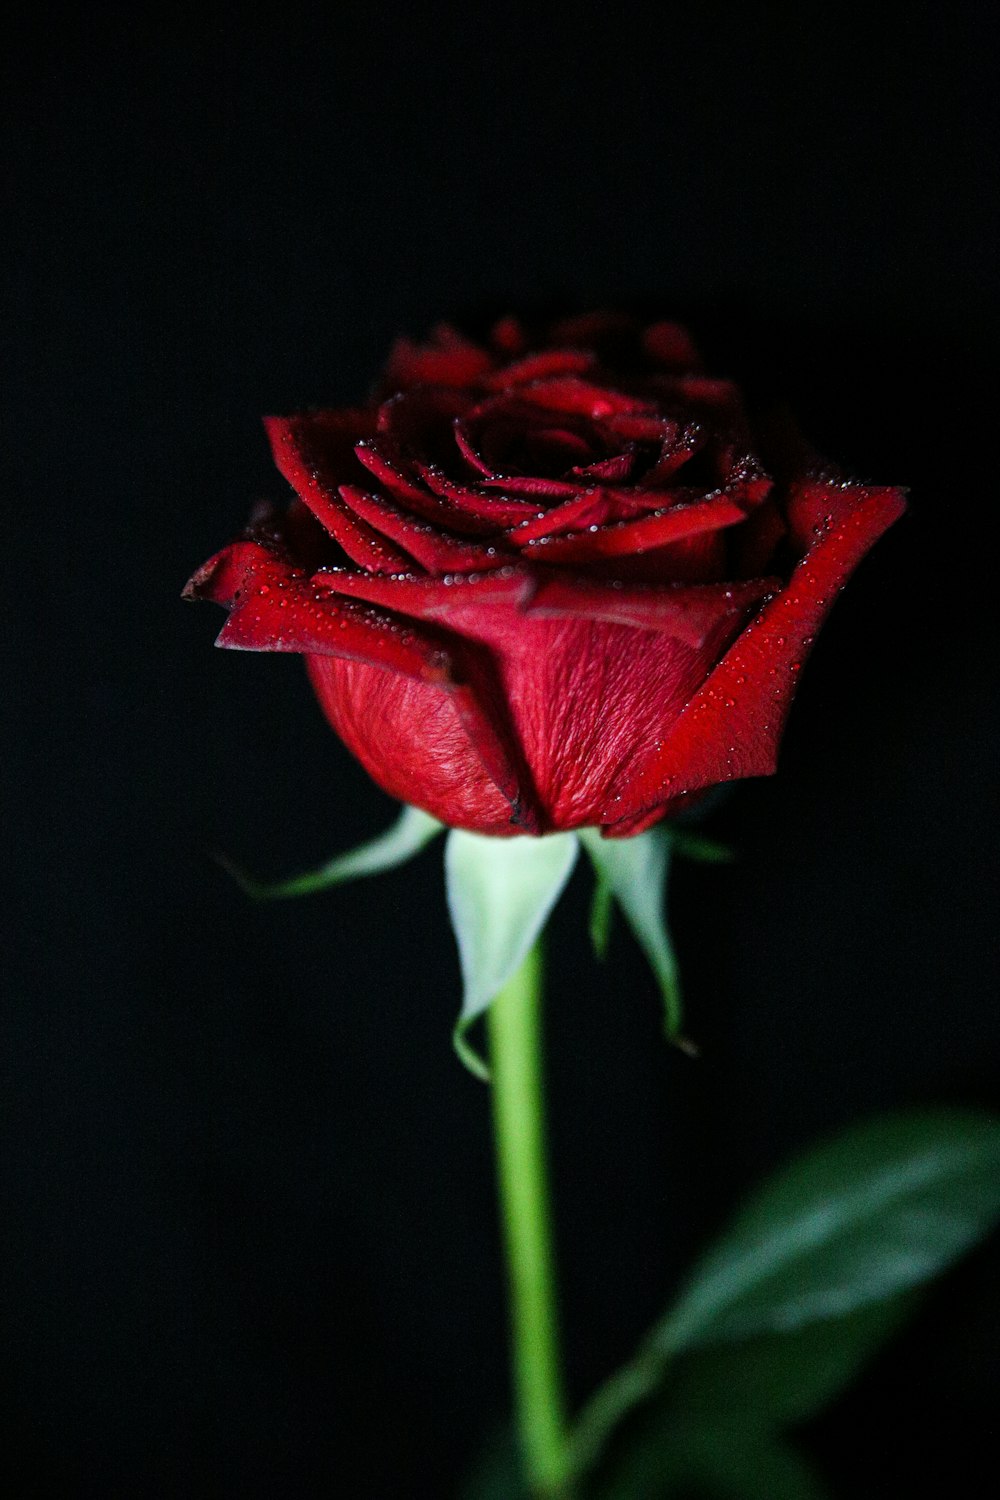 a single red rose with water droplets on it